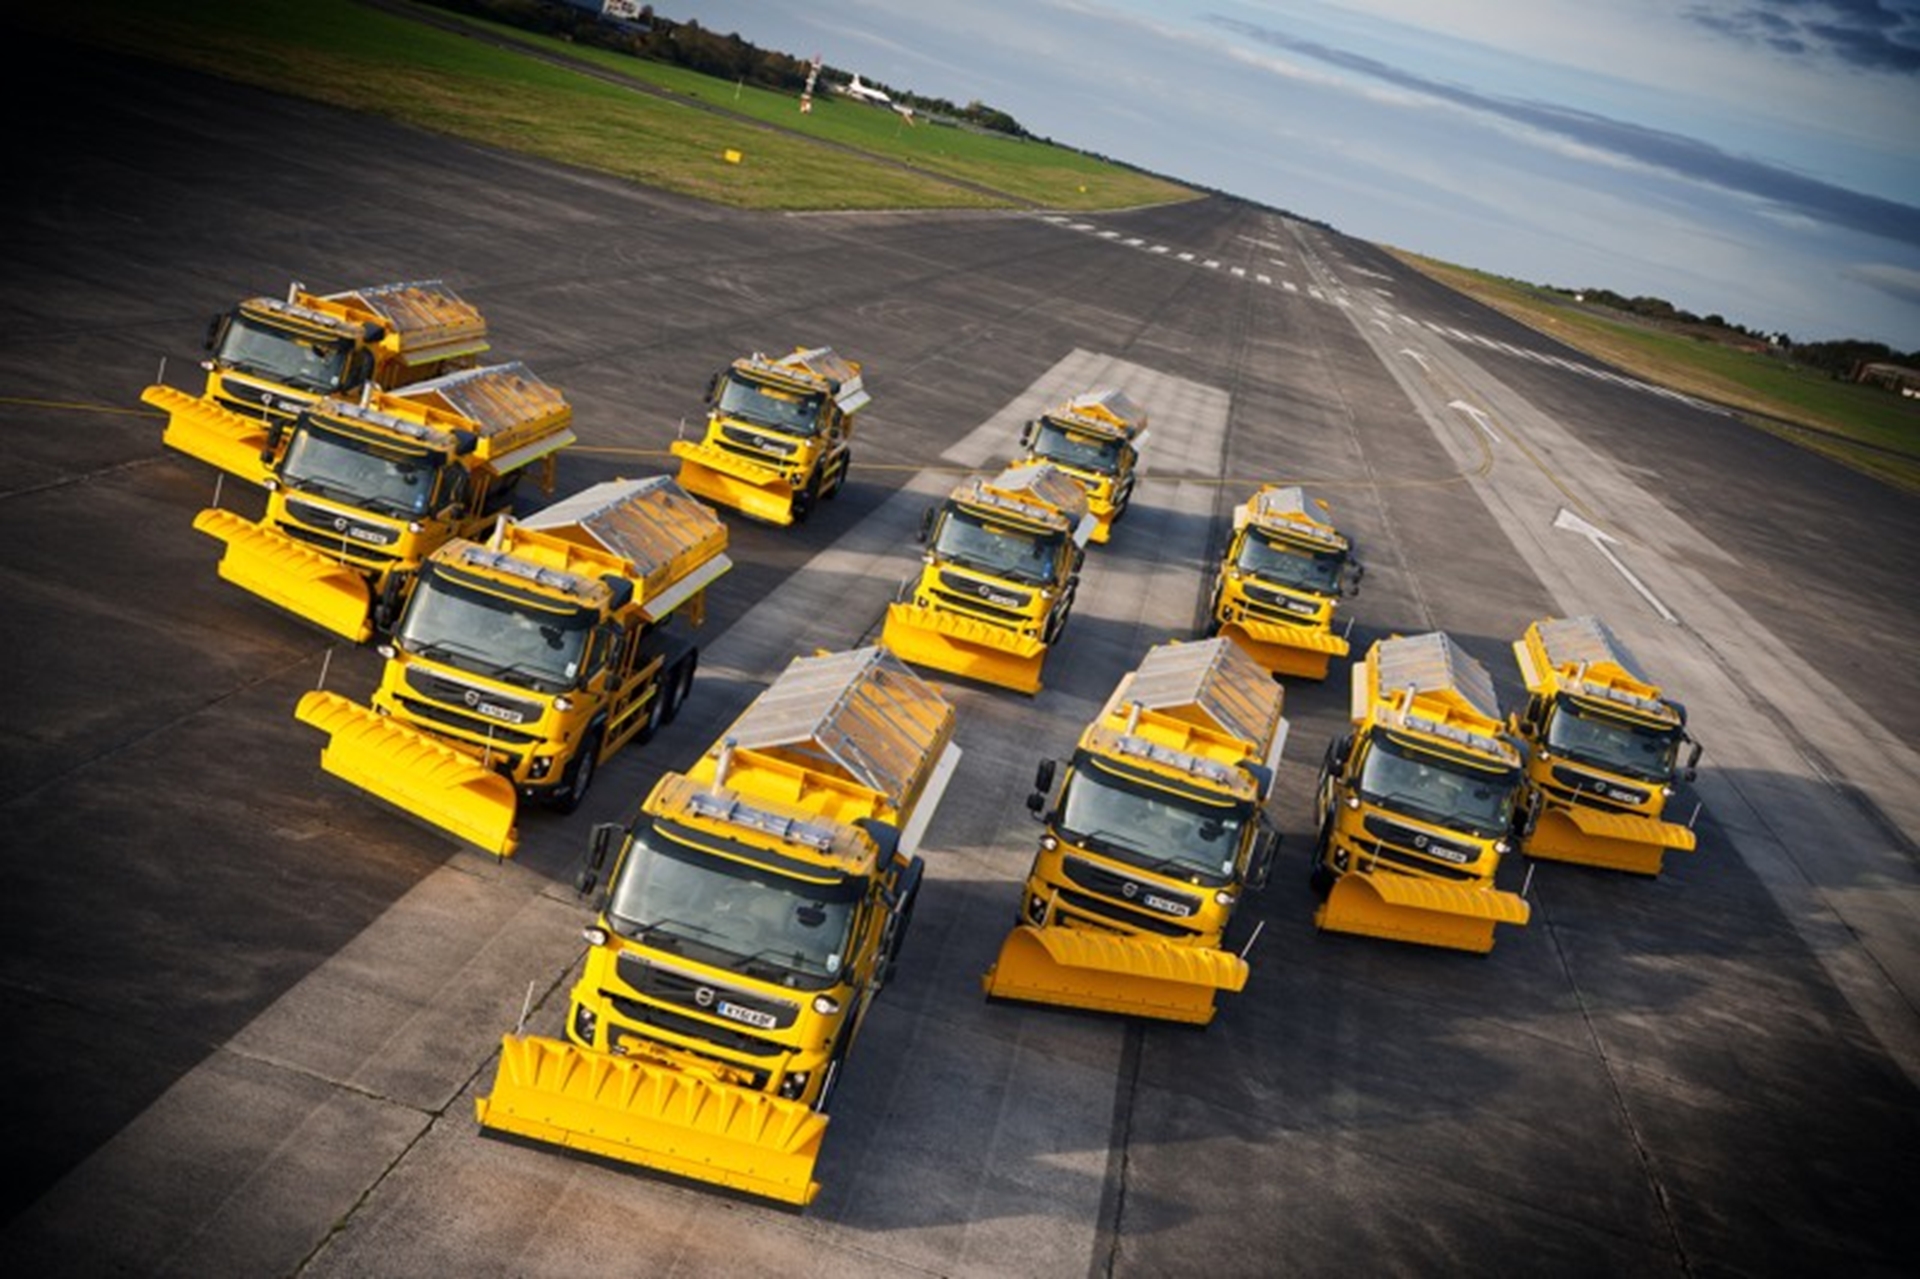 FIRST FMX SNOWPLOUGHS IN UK FOR SOUTH GLOUCESTERSHIRE COUNCIL